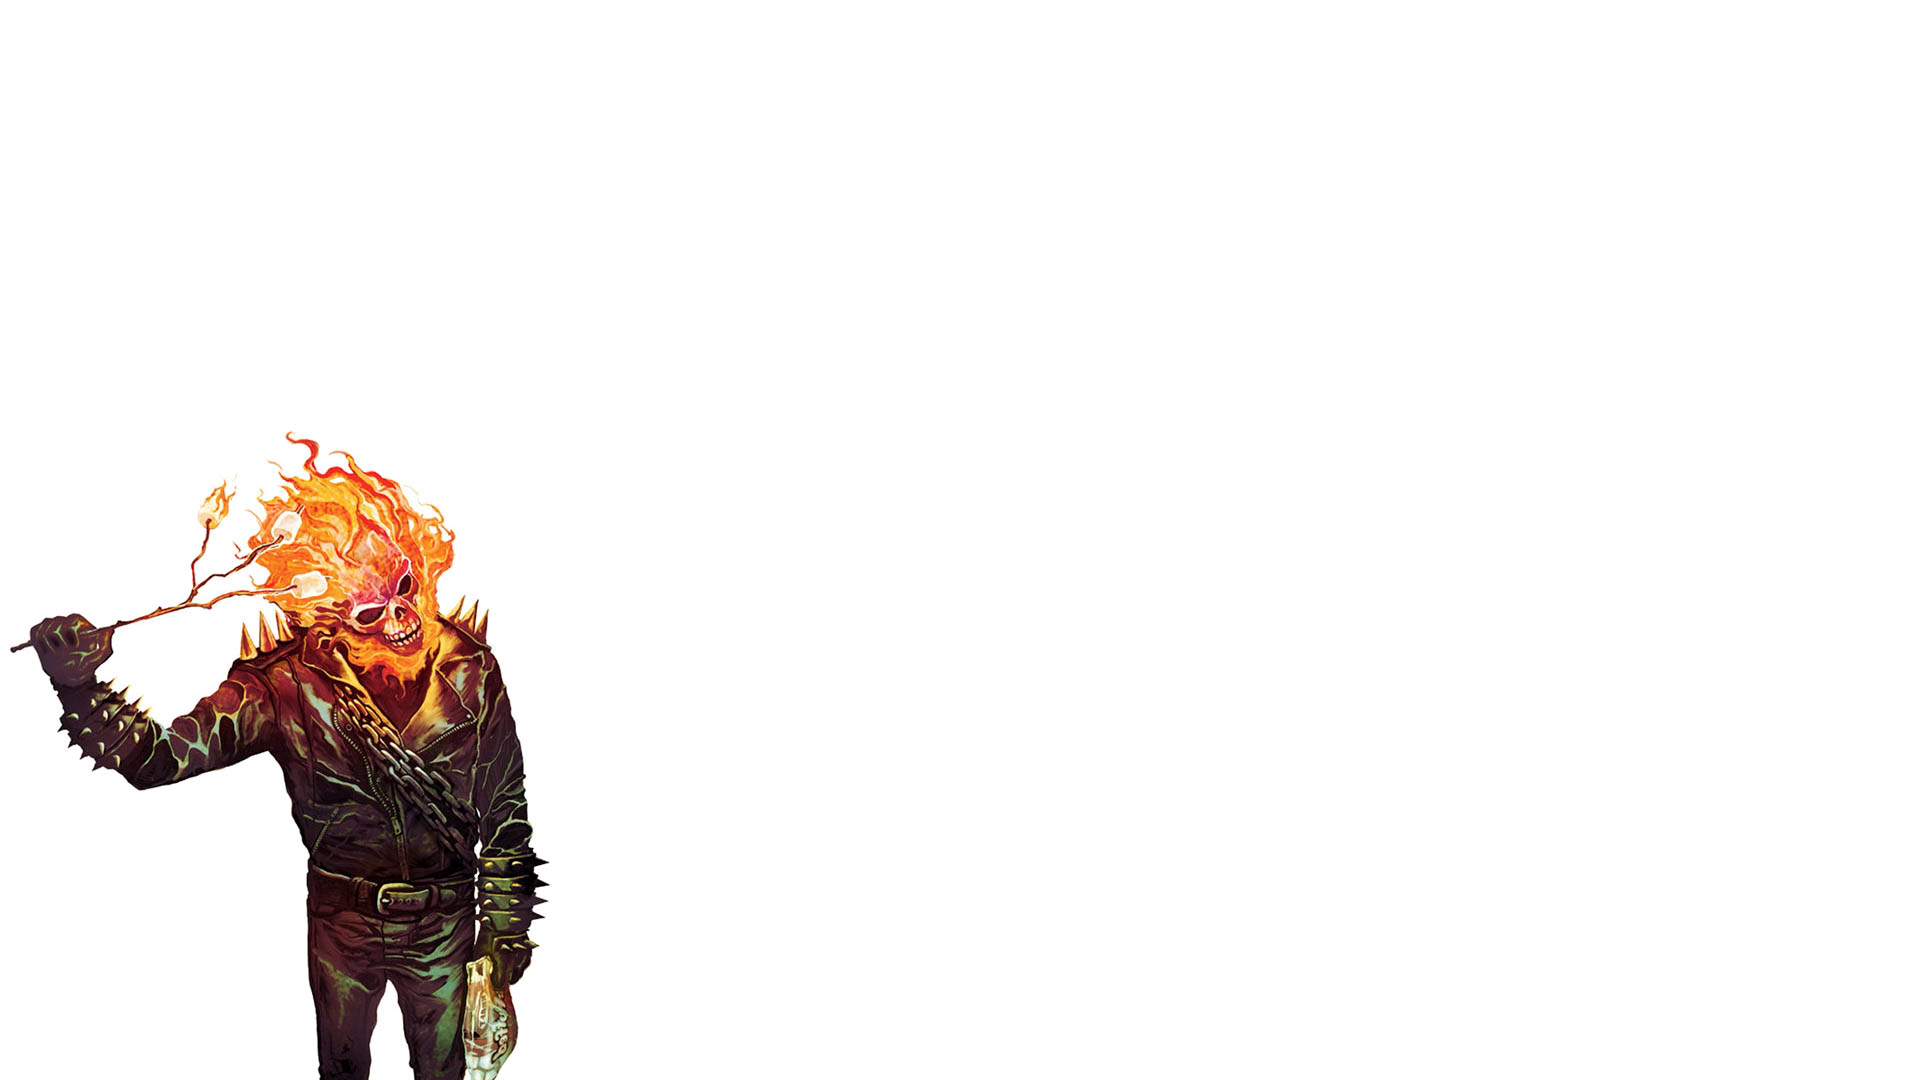 Ghost Rider - Action Figure , HD Wallpaper & Backgrounds